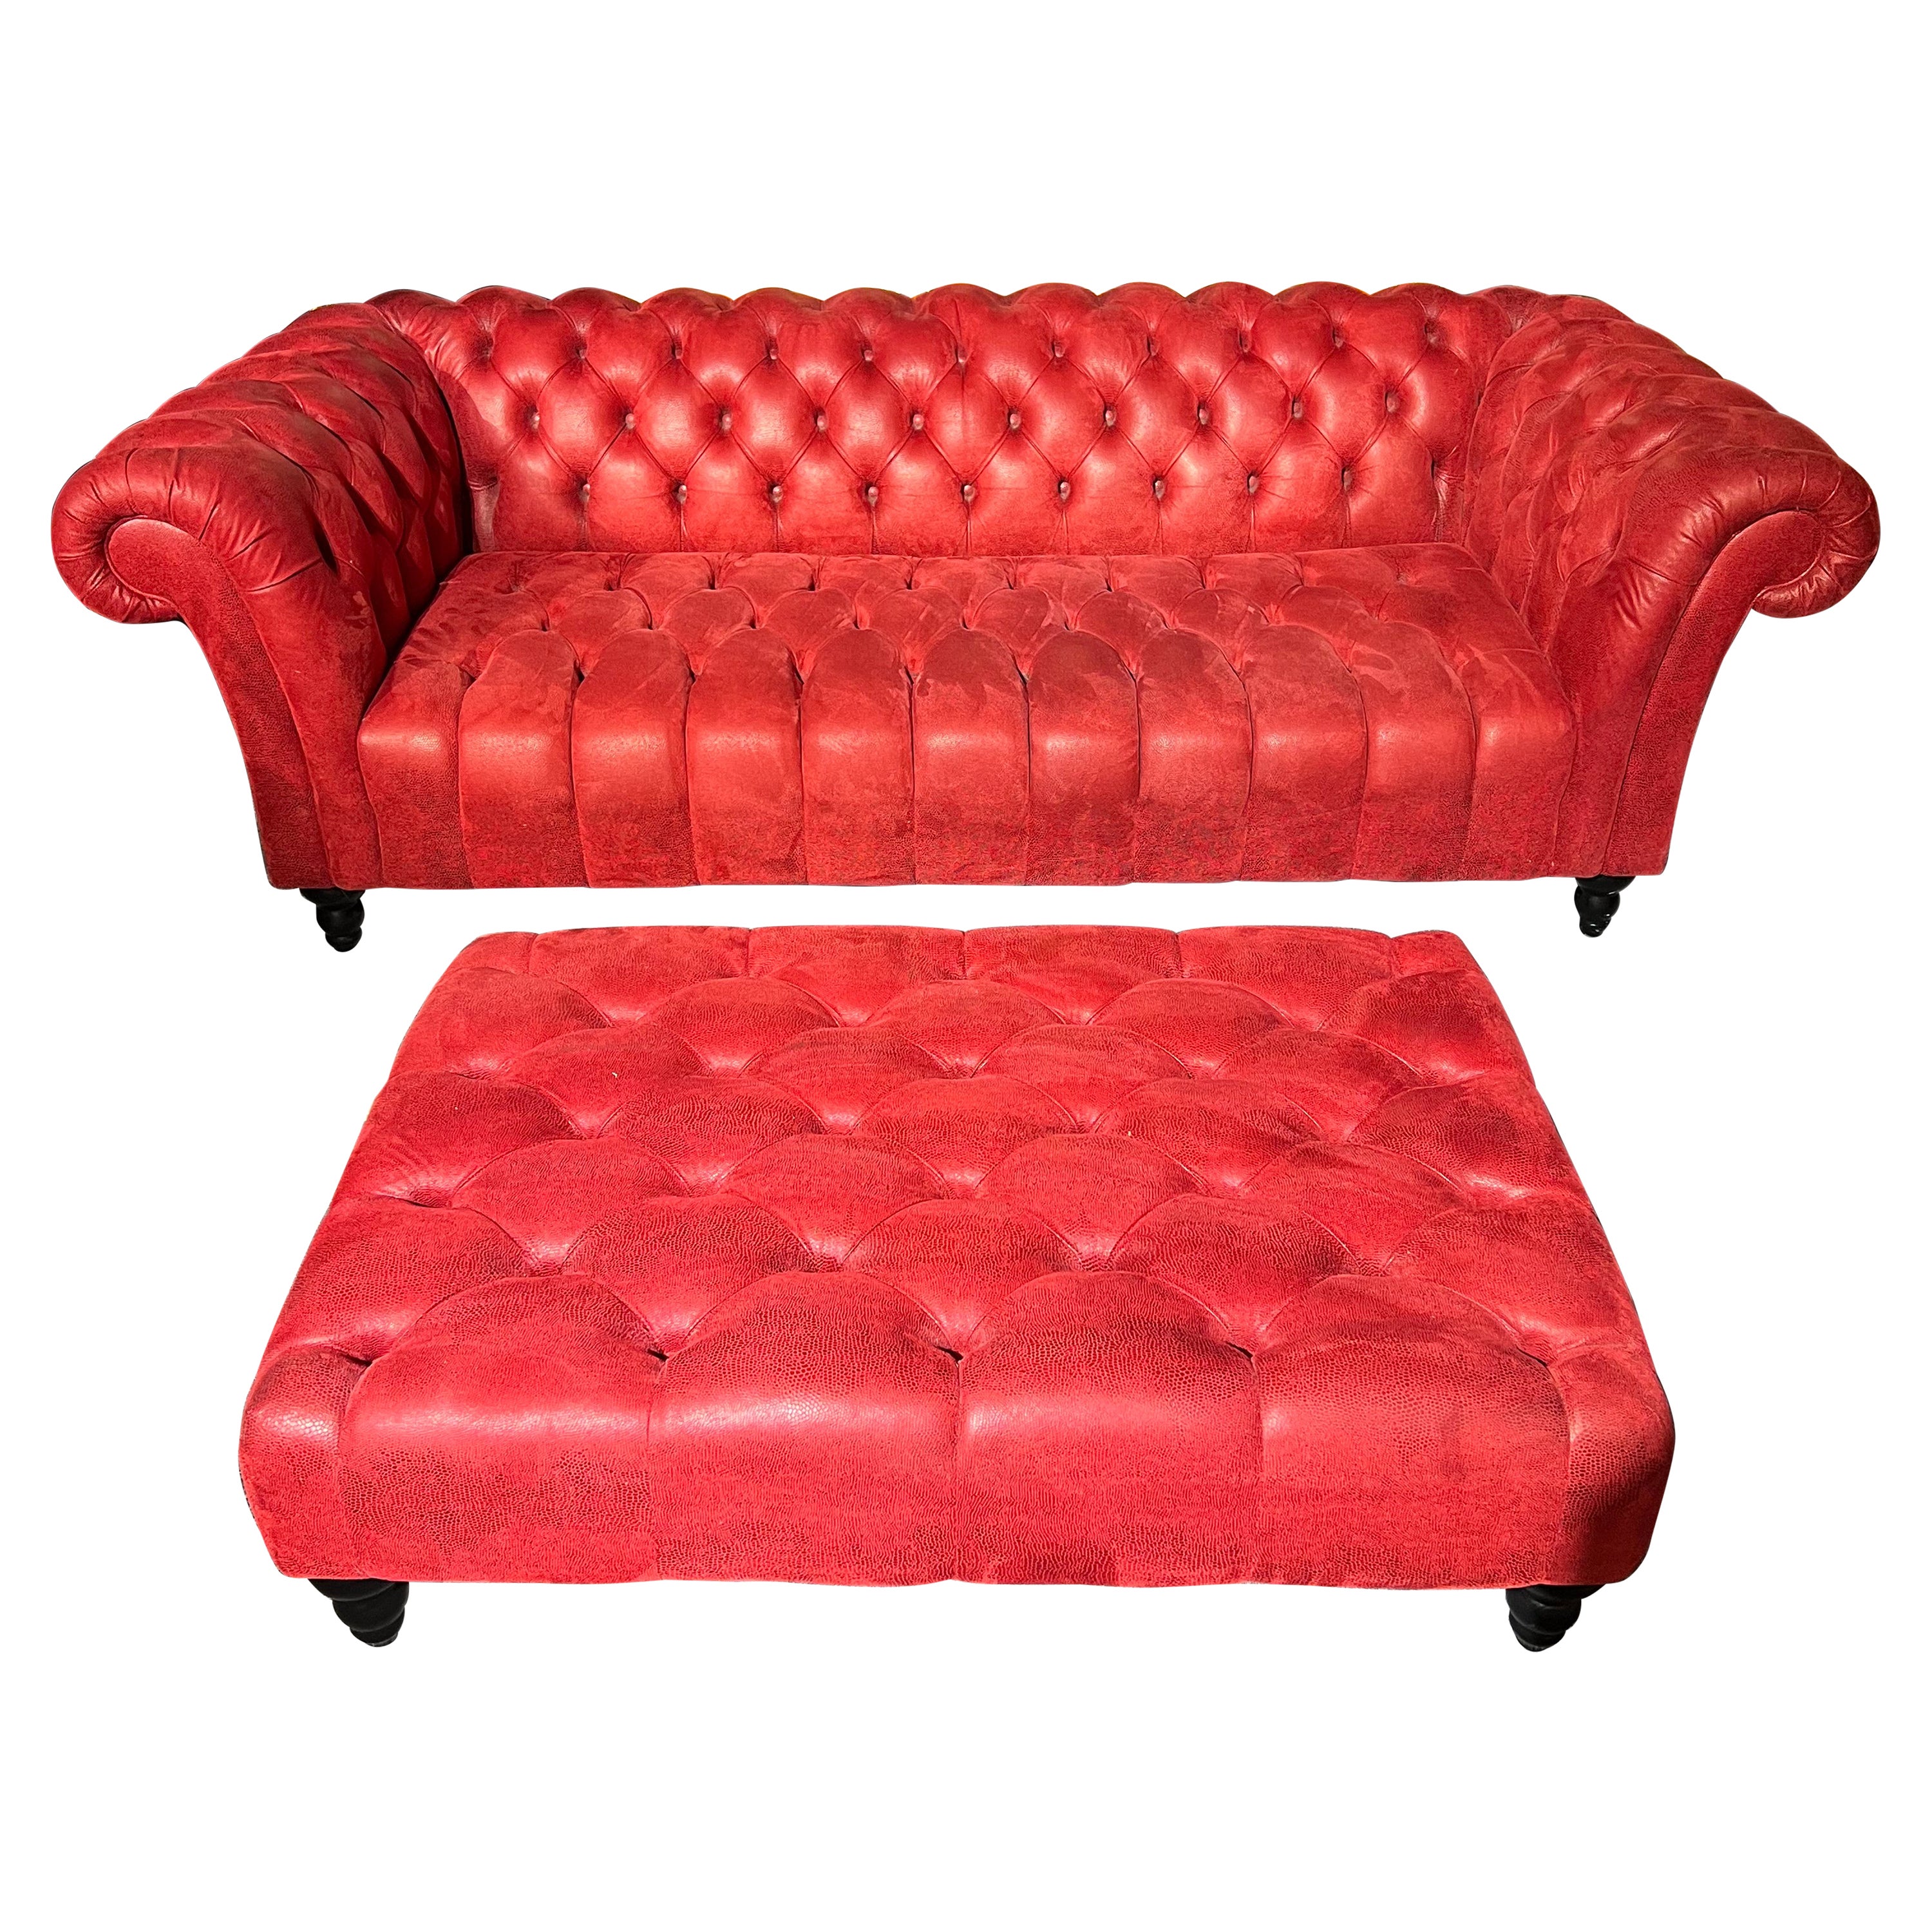 Sofa / Couch Chesterfield Luxury Baroque Style Design Velvet Red Alcantara Look For Sale